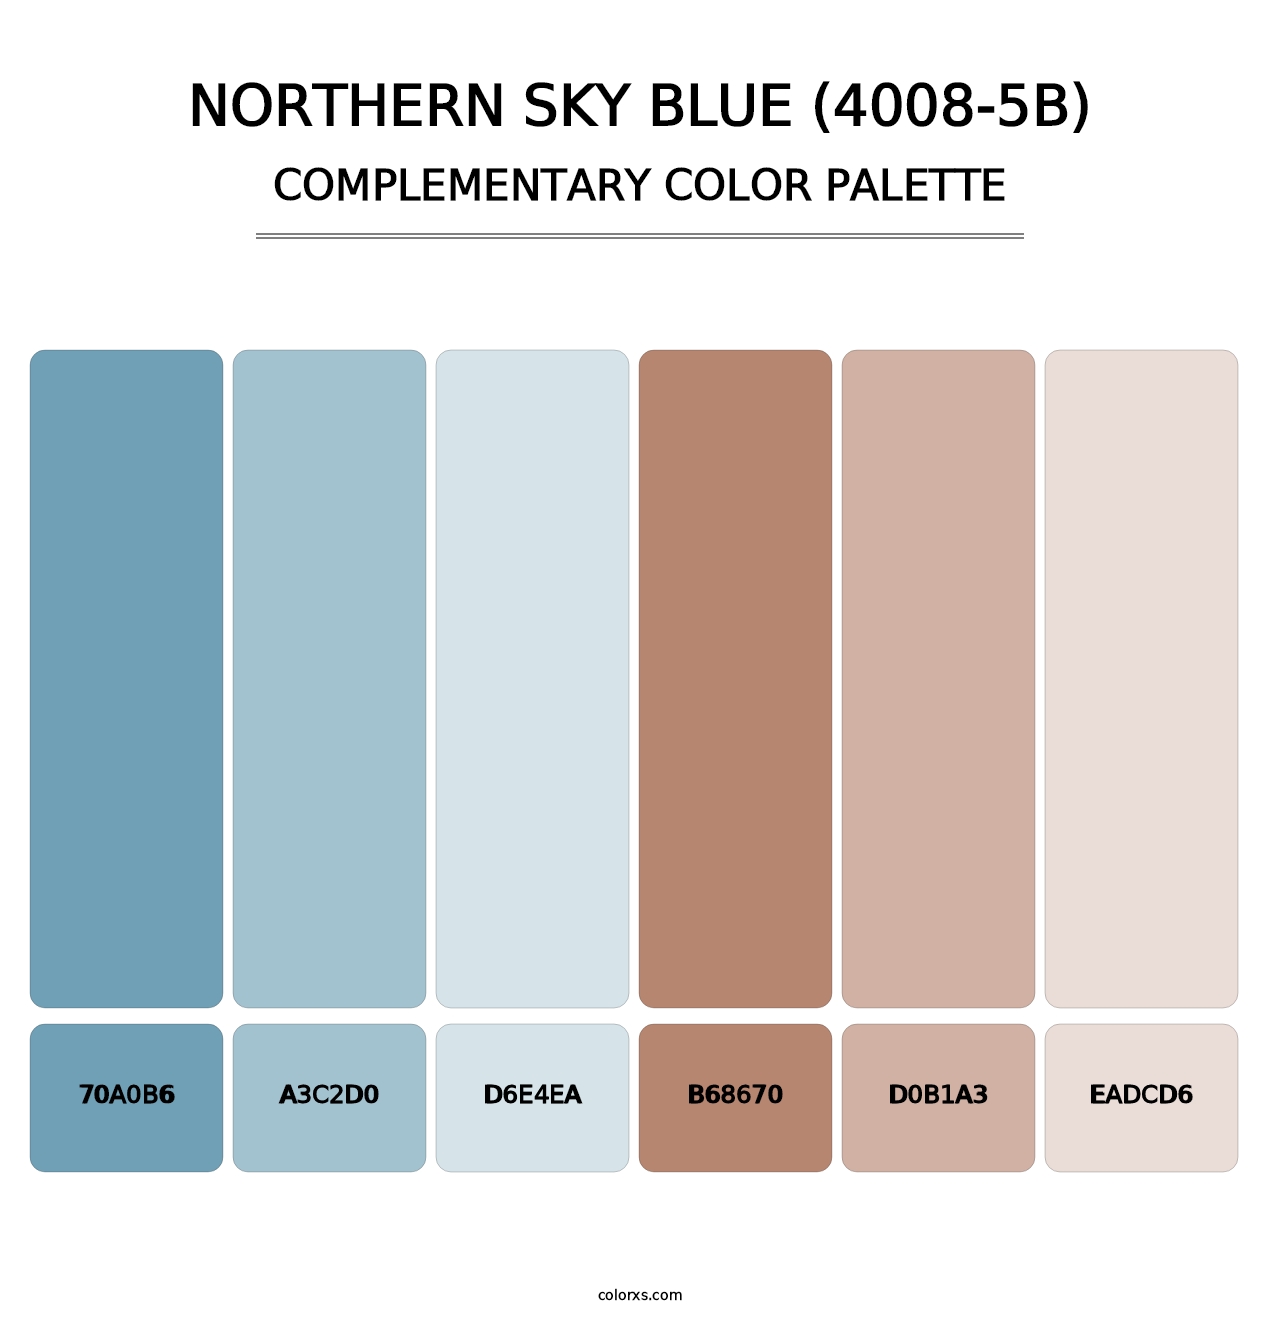 Northern Sky Blue (4008-5B) - Complementary Color Palette